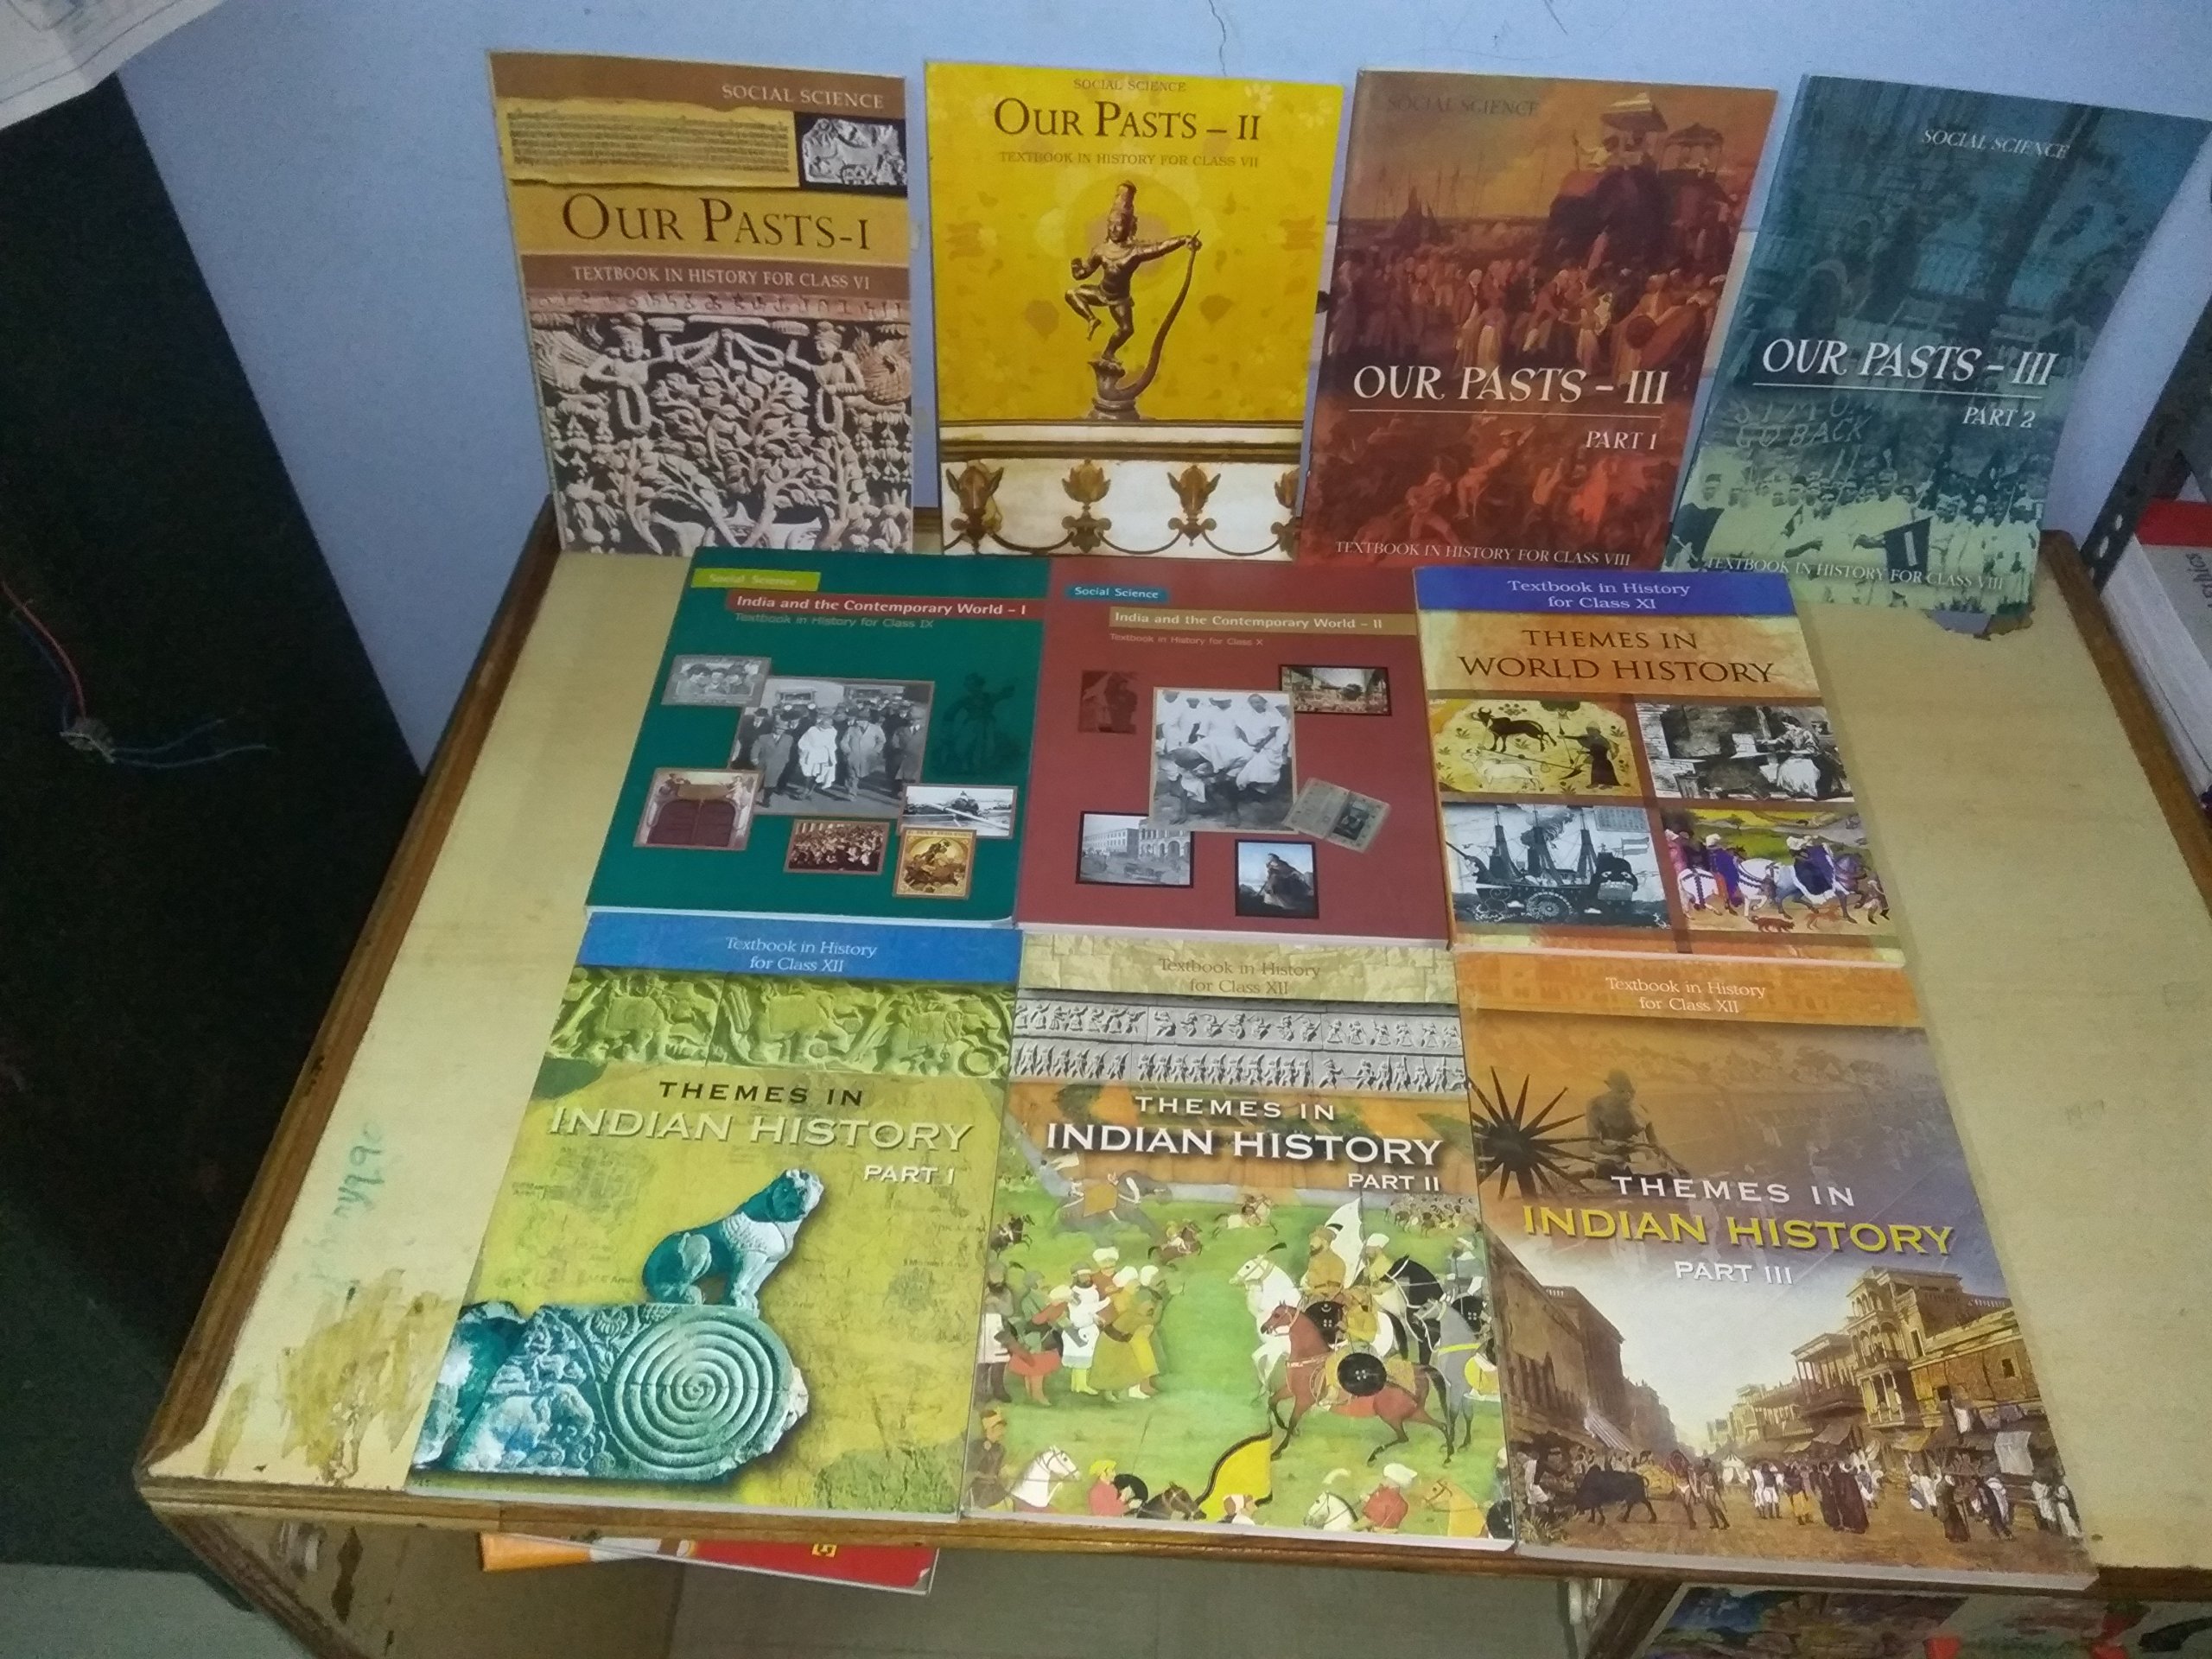 NCERT - HISTORY complete set (6-12) for IAS and other